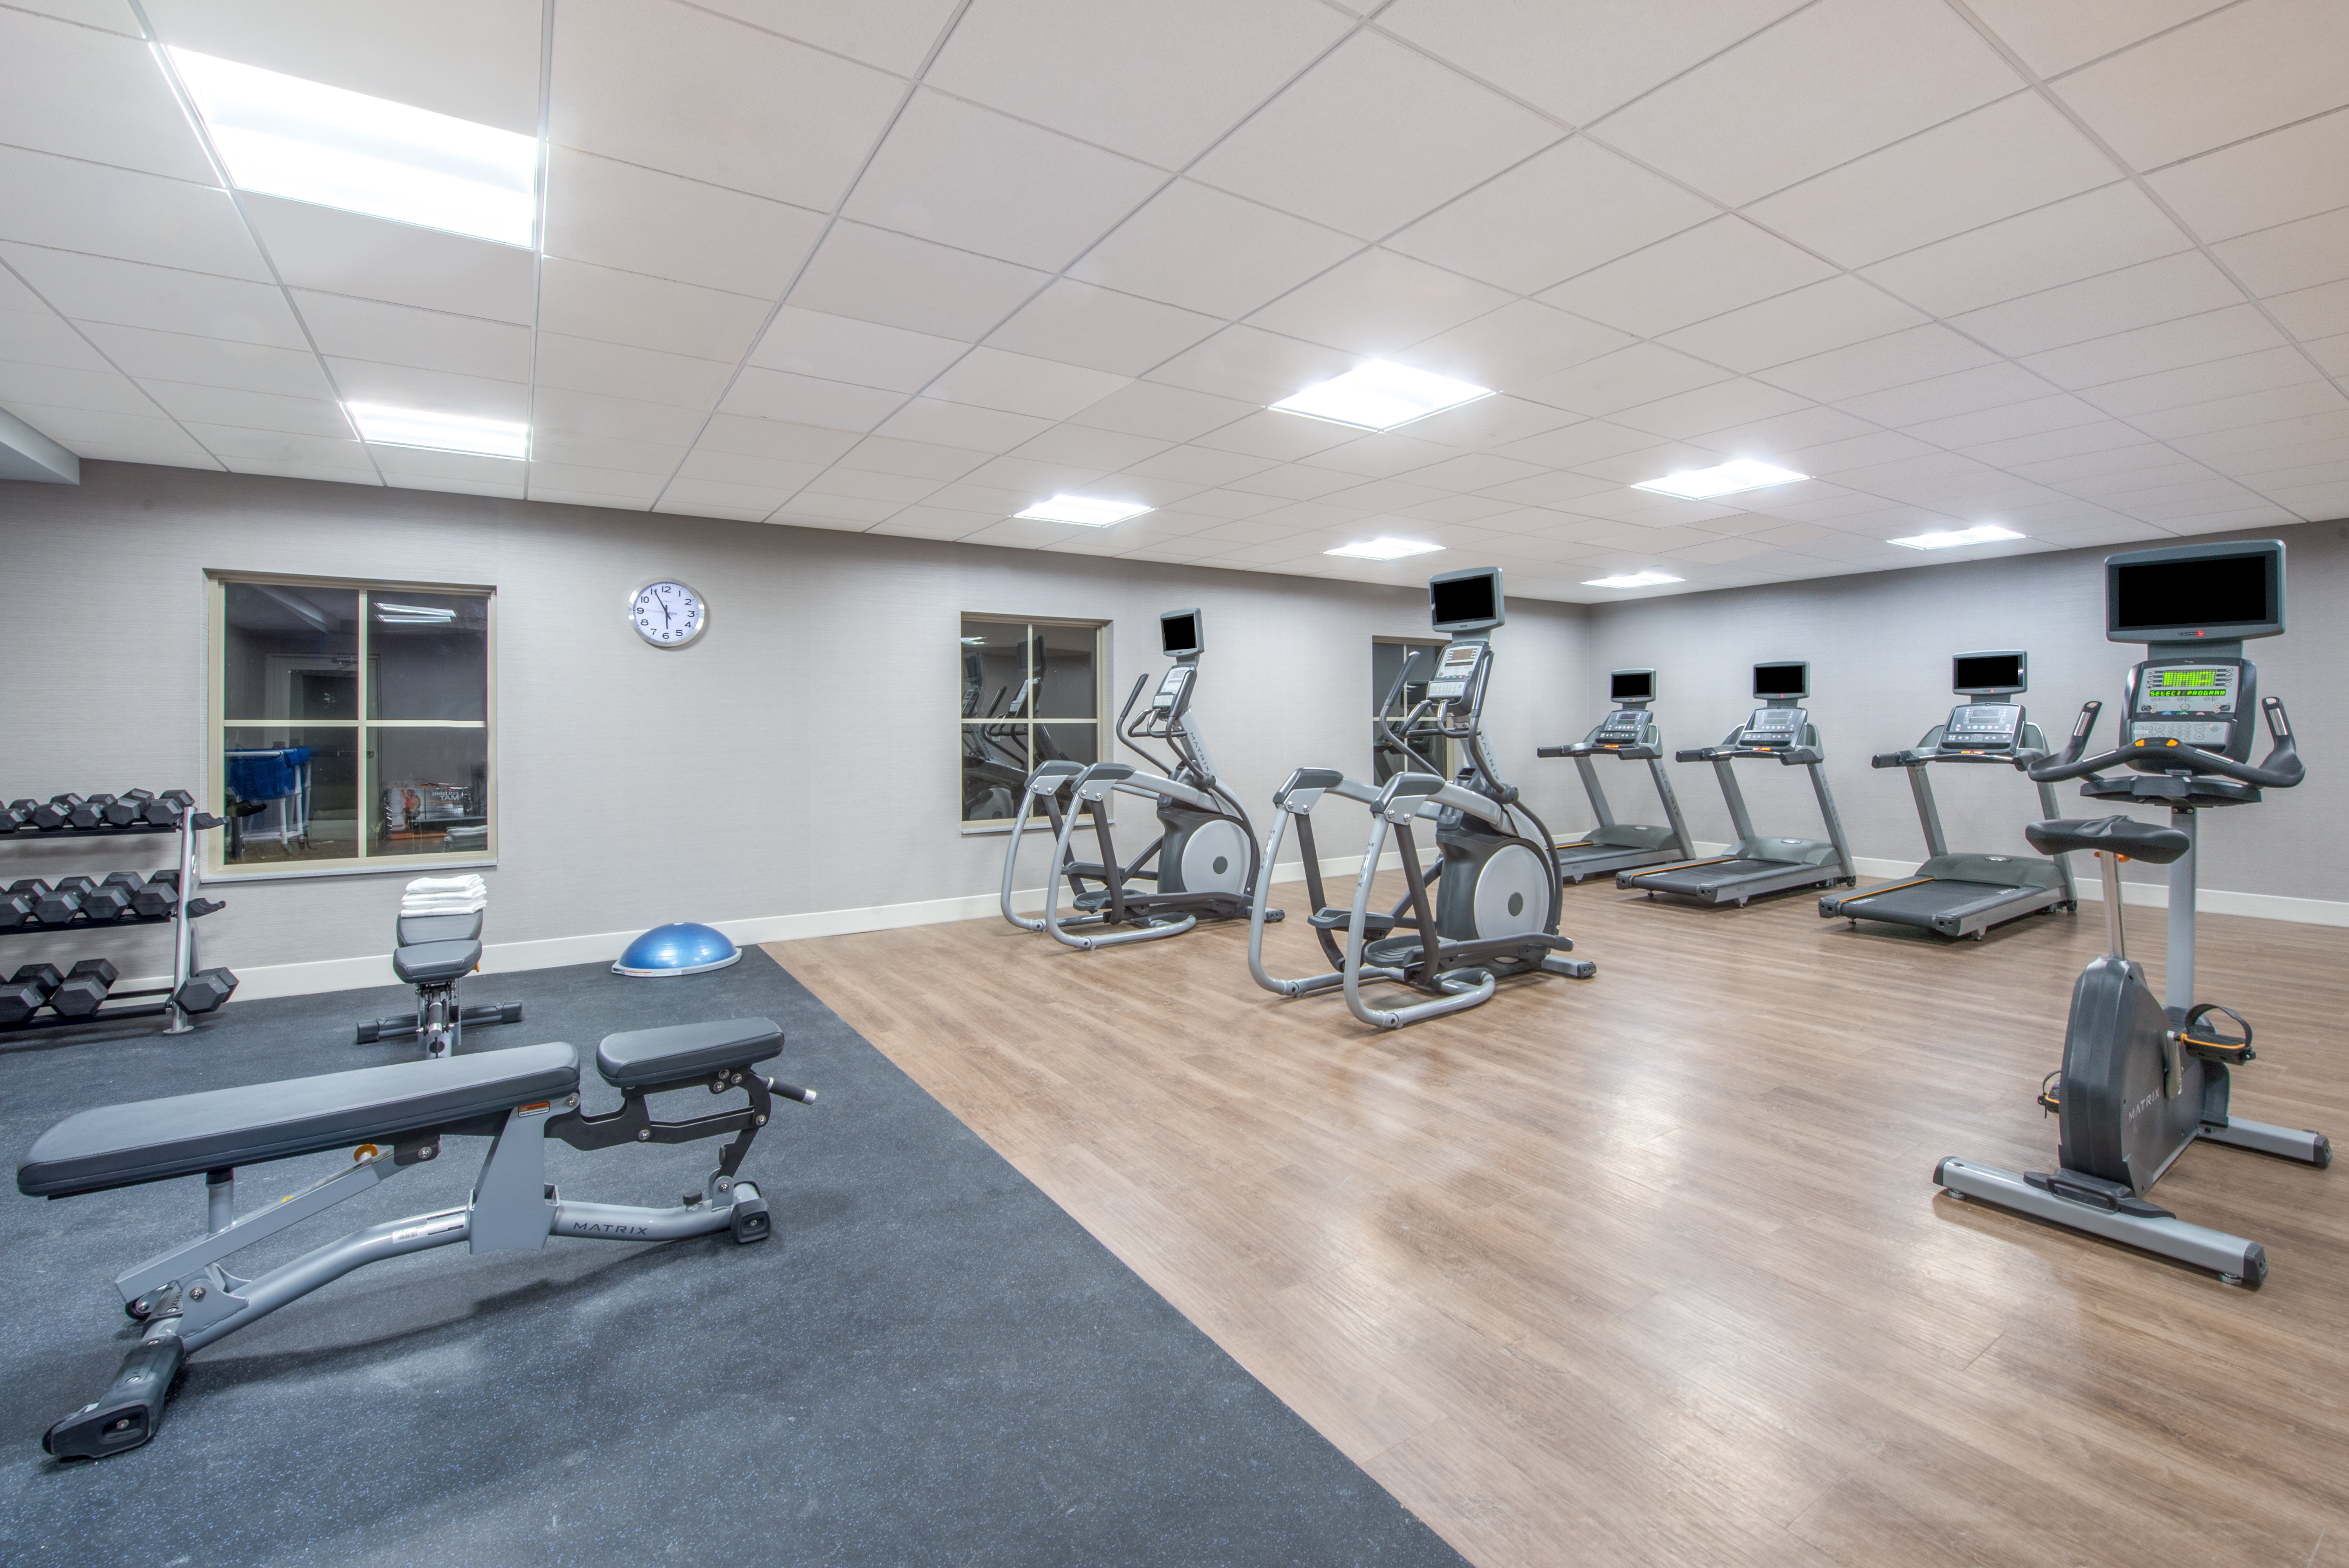 Get a great work out on in our expanded fitness facility